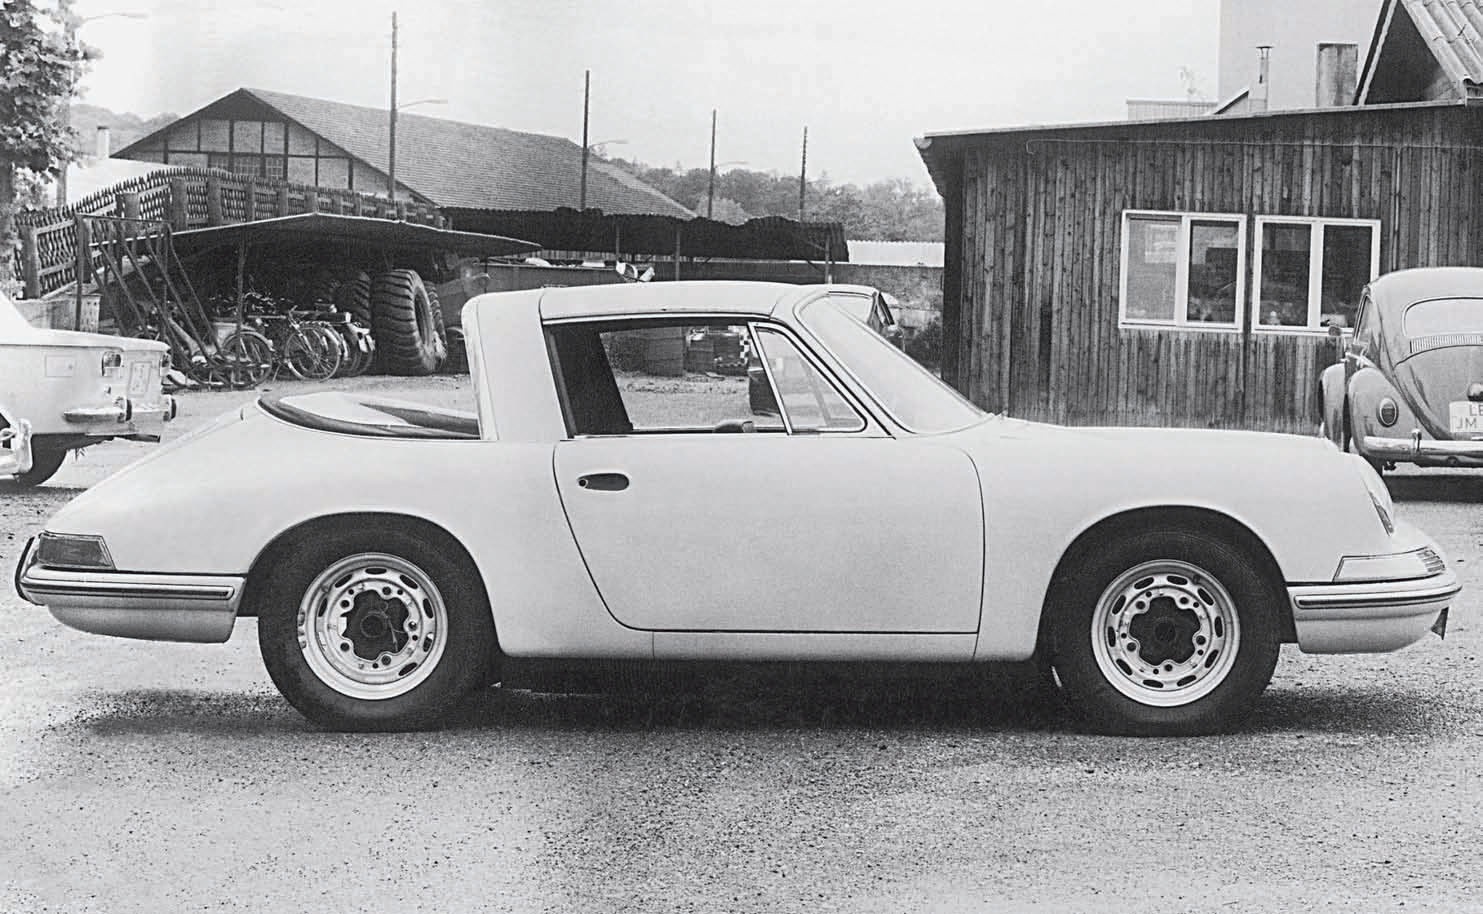 Chassis 13 360 appeared with a mockup rollover bar and removable roof panel on June 12, 1964. At this point concepts for the rollover bar remained in body color. Porsche Archiv